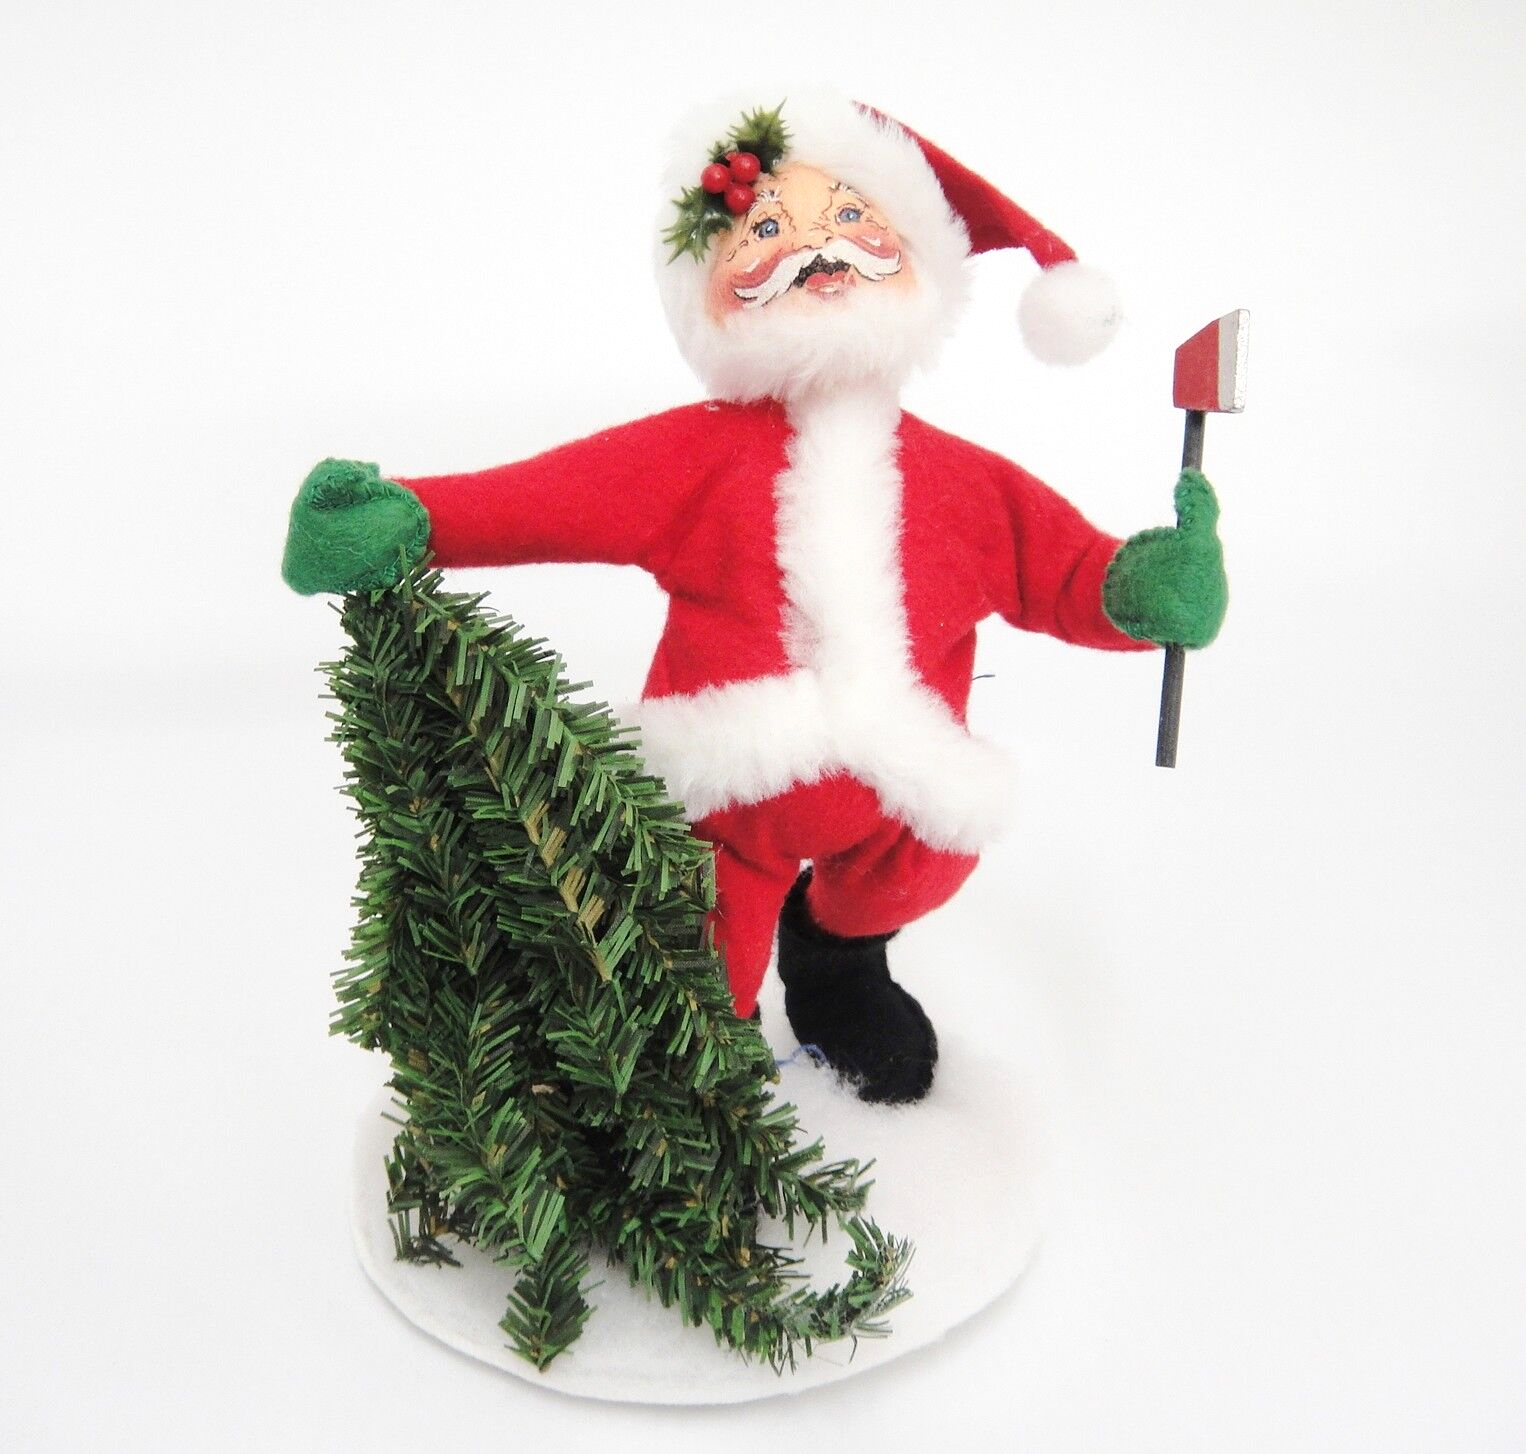 Primary image for Annalee Dolls 1992 Santa Cutting Down Christmas Tree Holds Greenery and Ax #5232